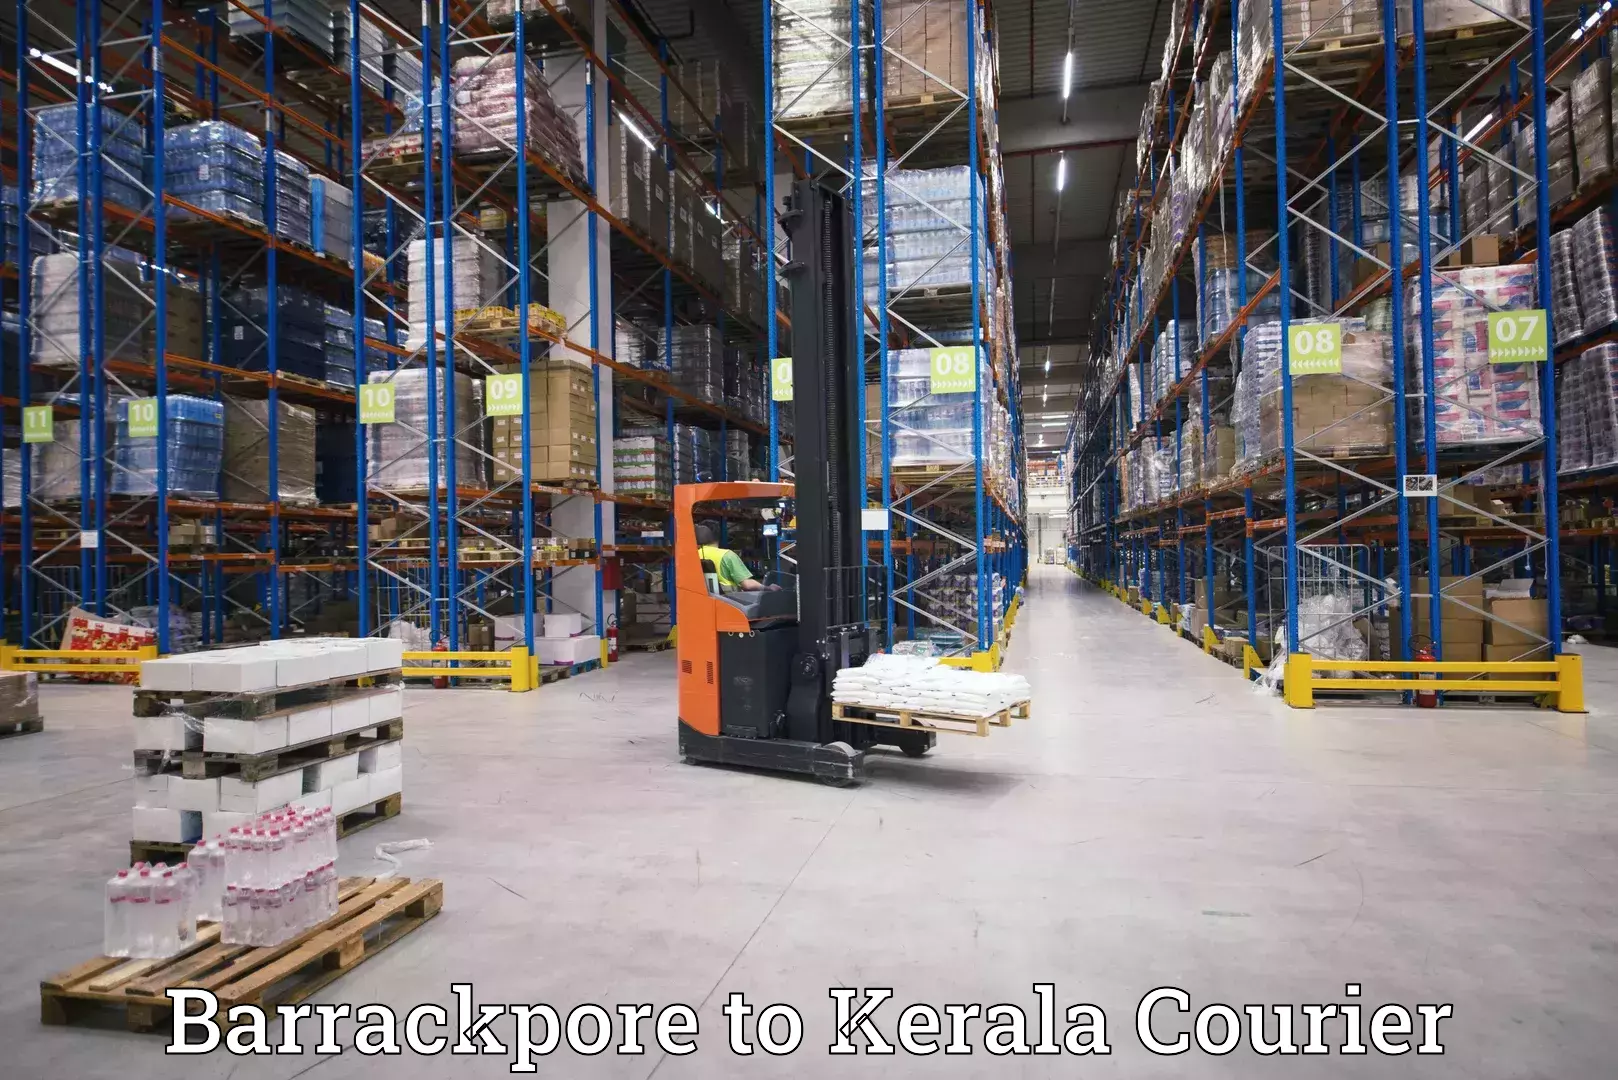 Express package handling Barrackpore to Kochi